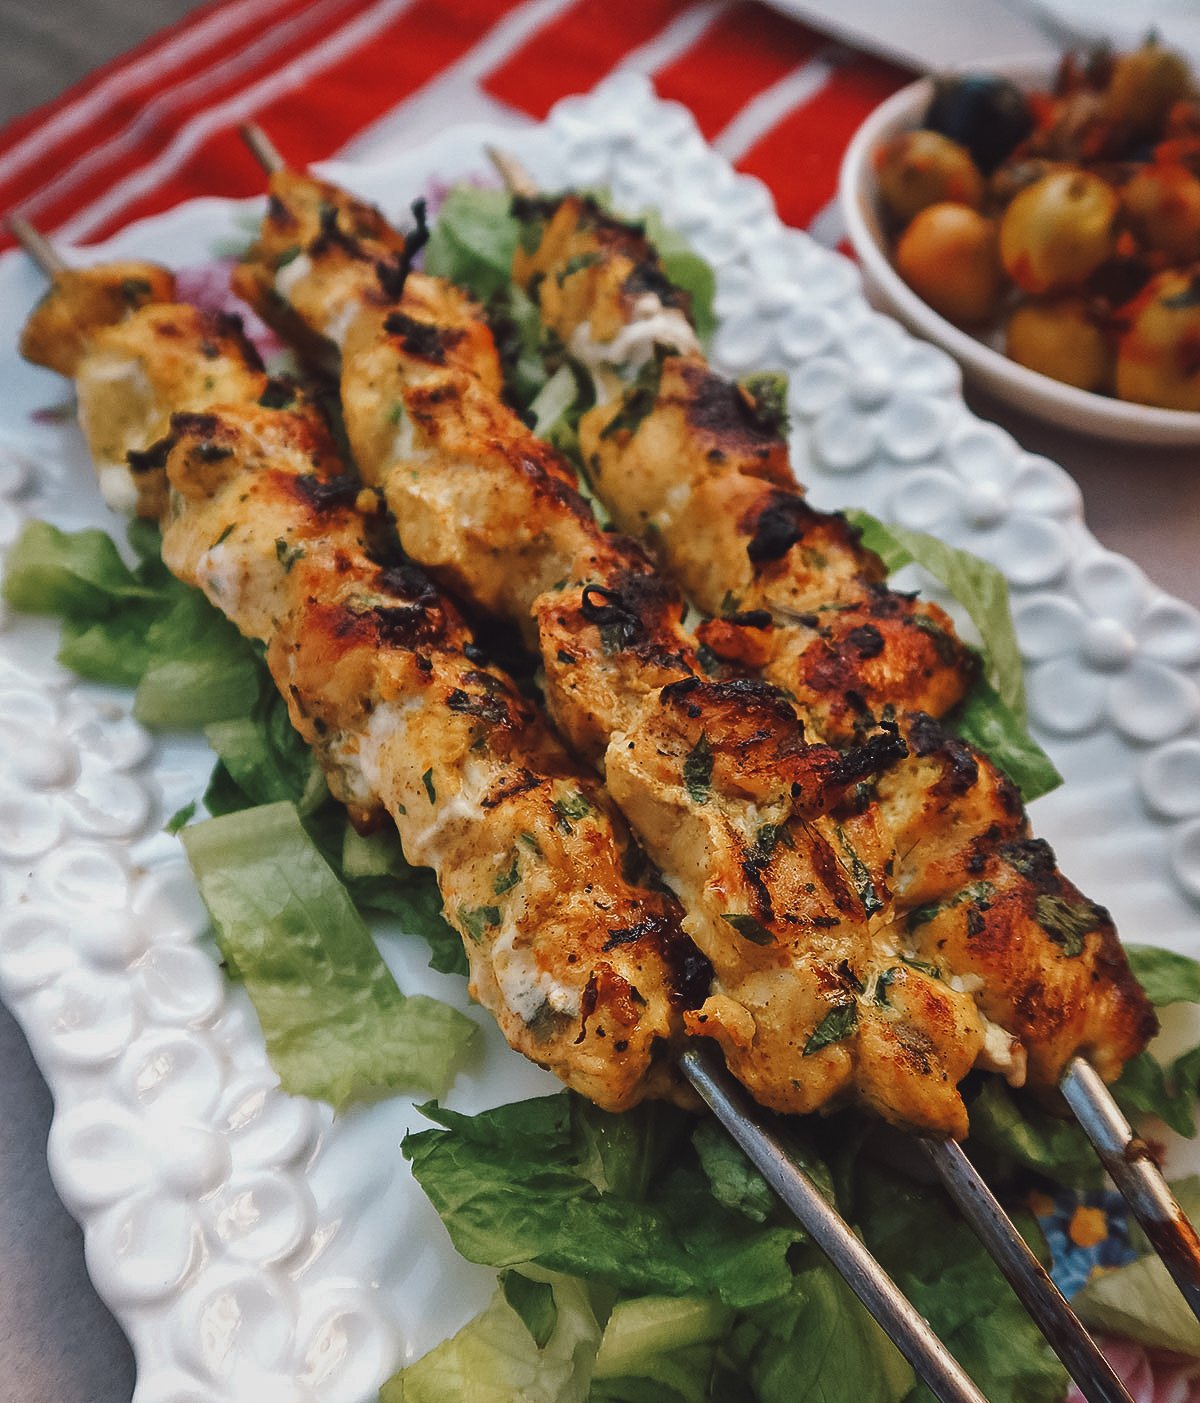 Grilled chicken at a restaurant in Tangier